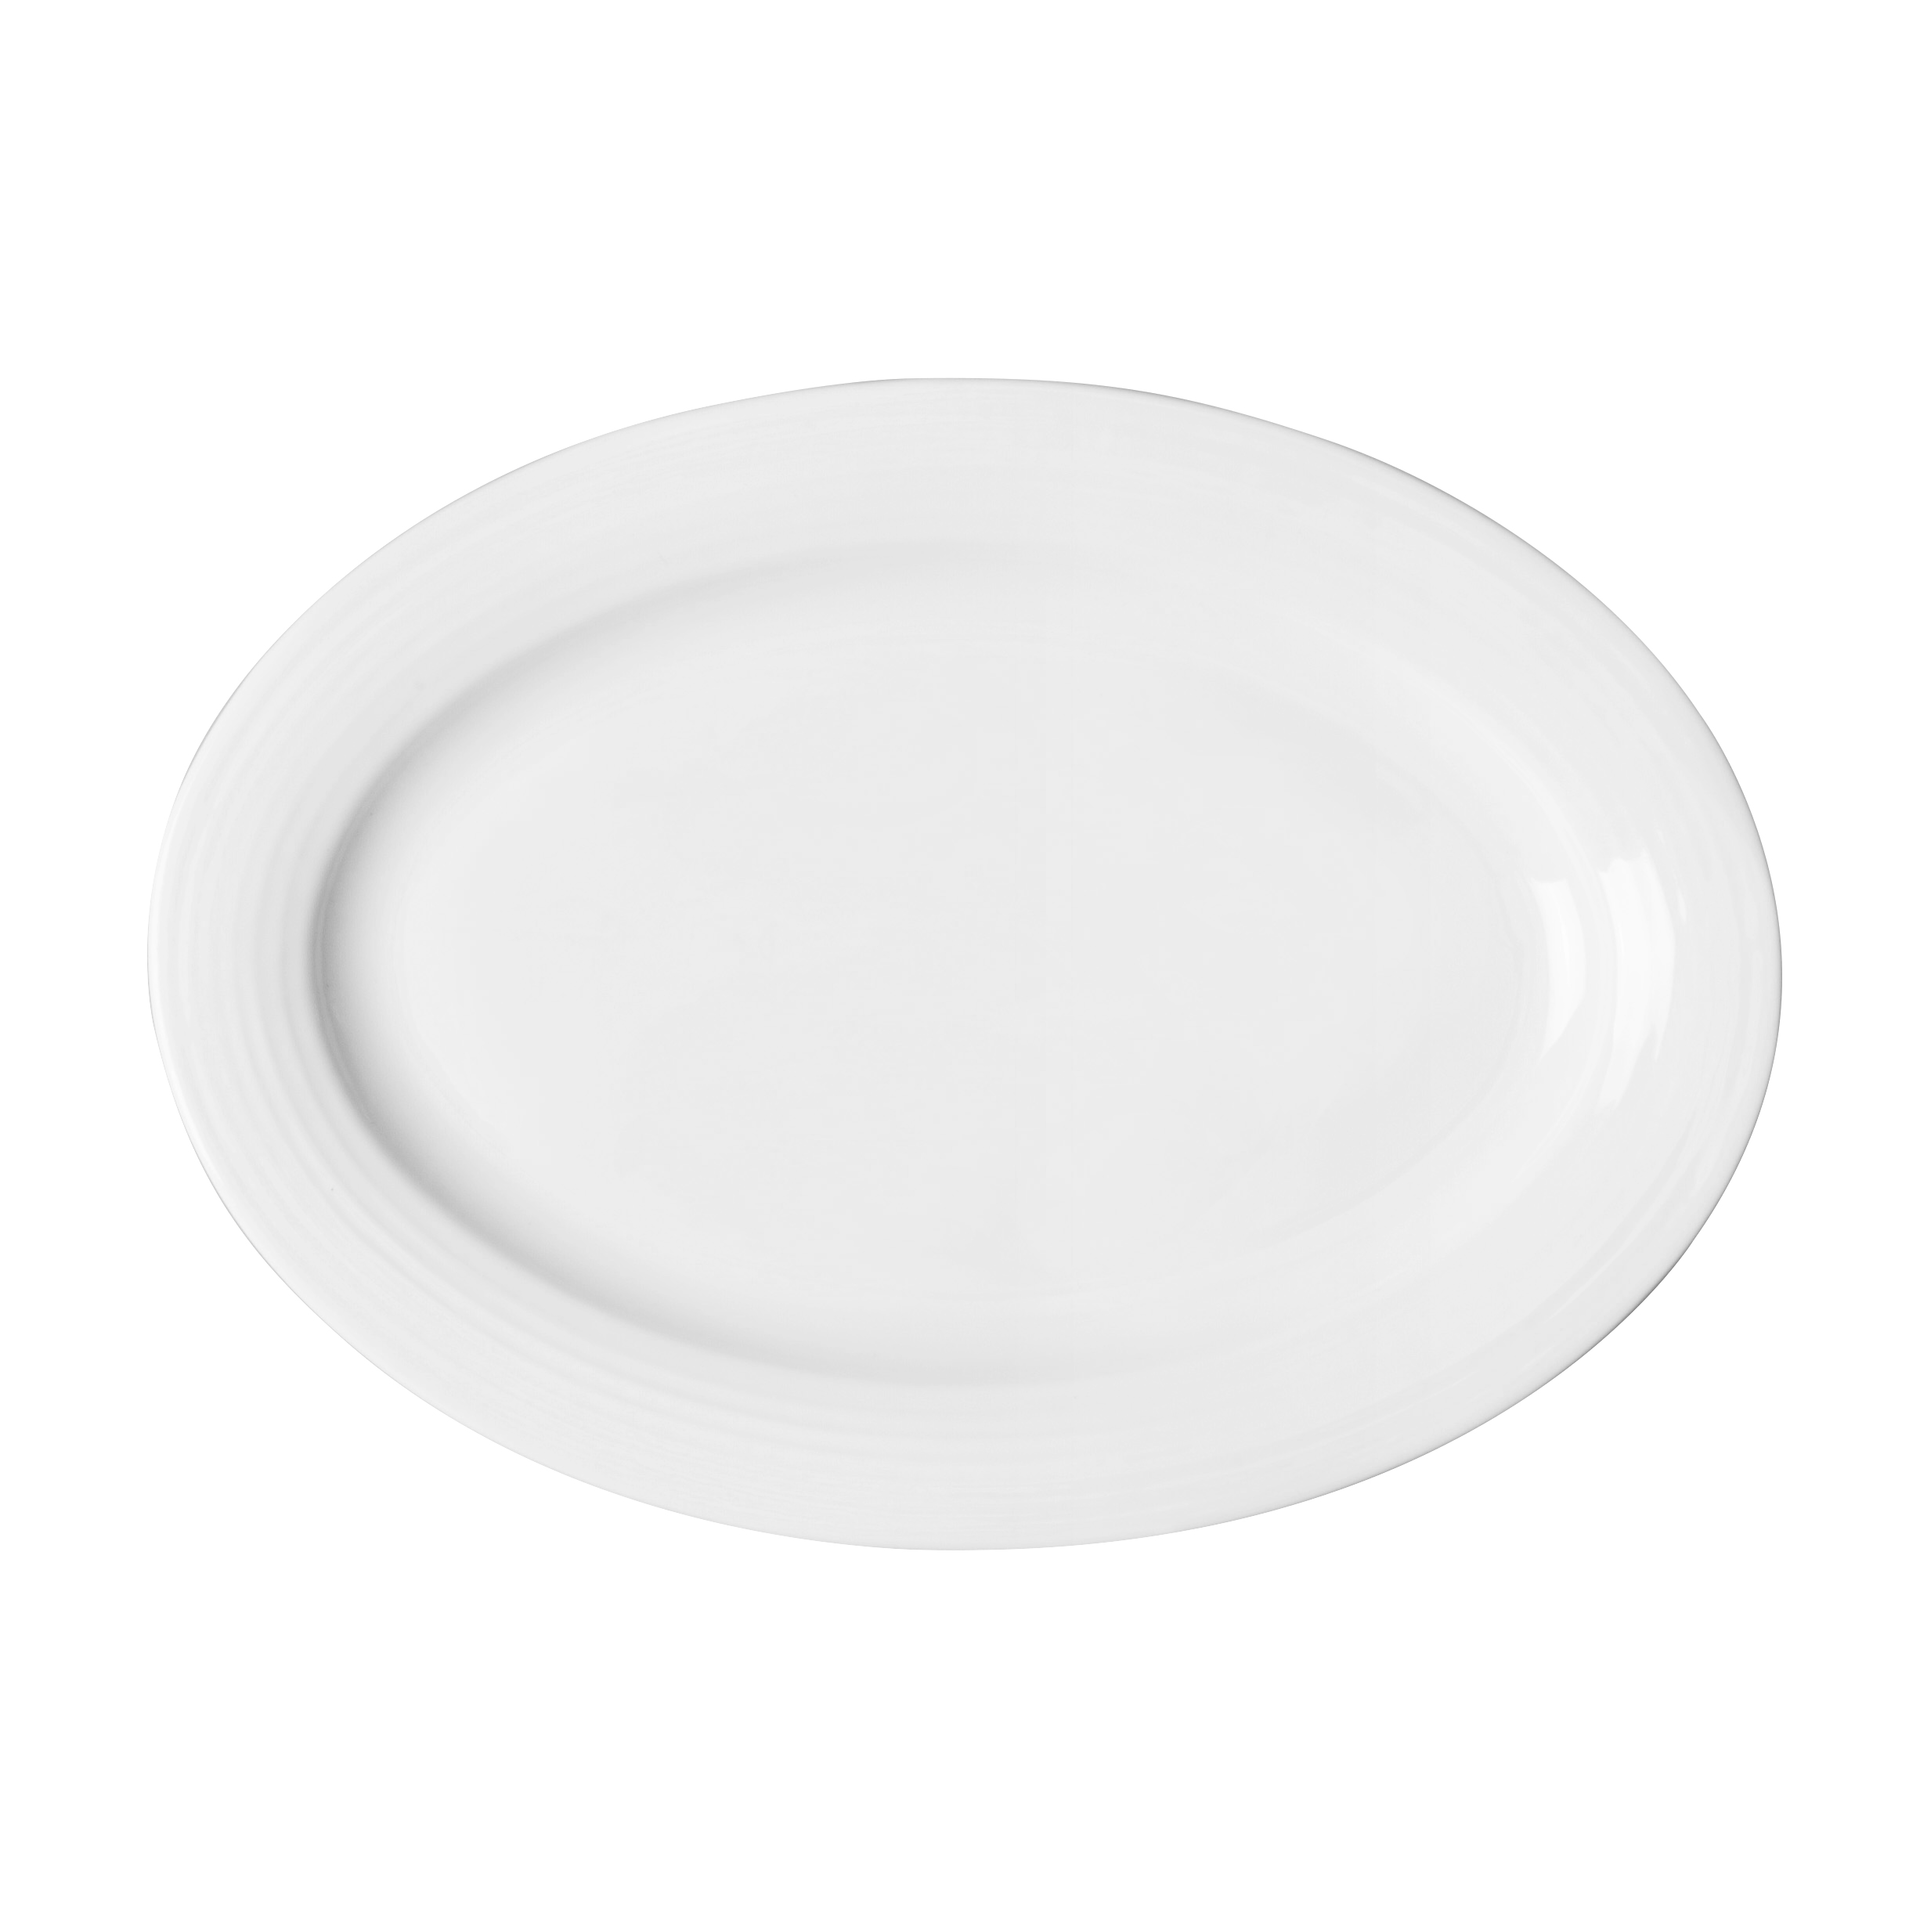 Unique Product Microwave Safe Hotel Restaurant Plates Mexican, Oval Shape Dish, Banquet Plate#